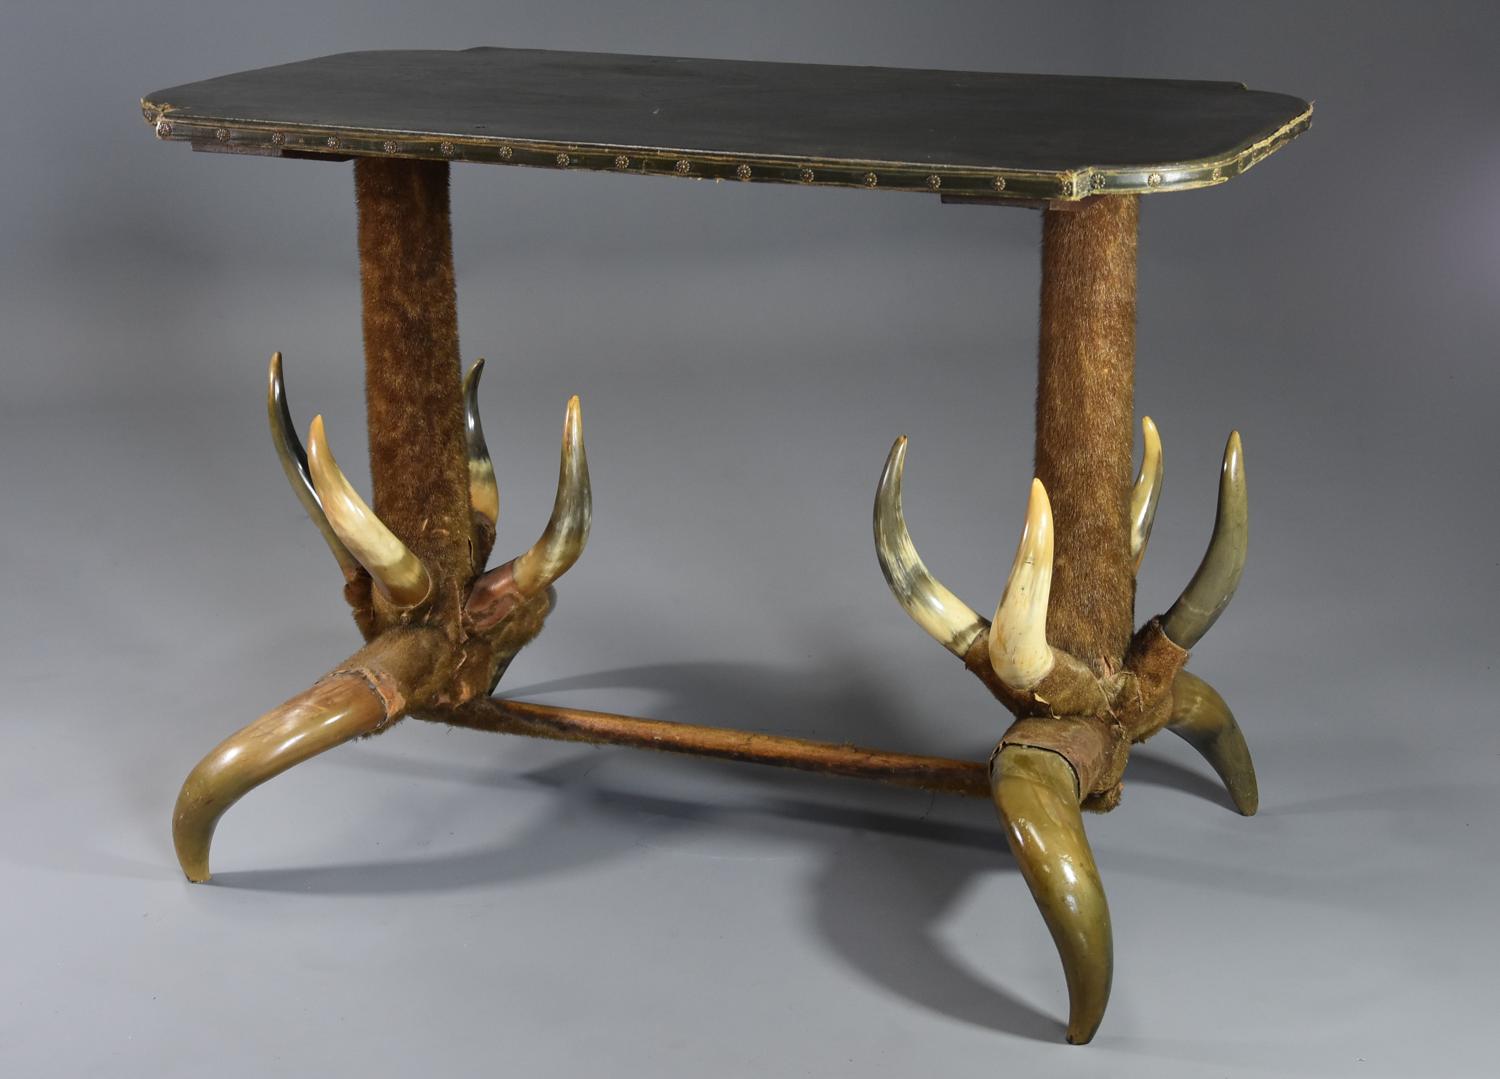 Late 19thc highly decorative & unusual German cow horn table